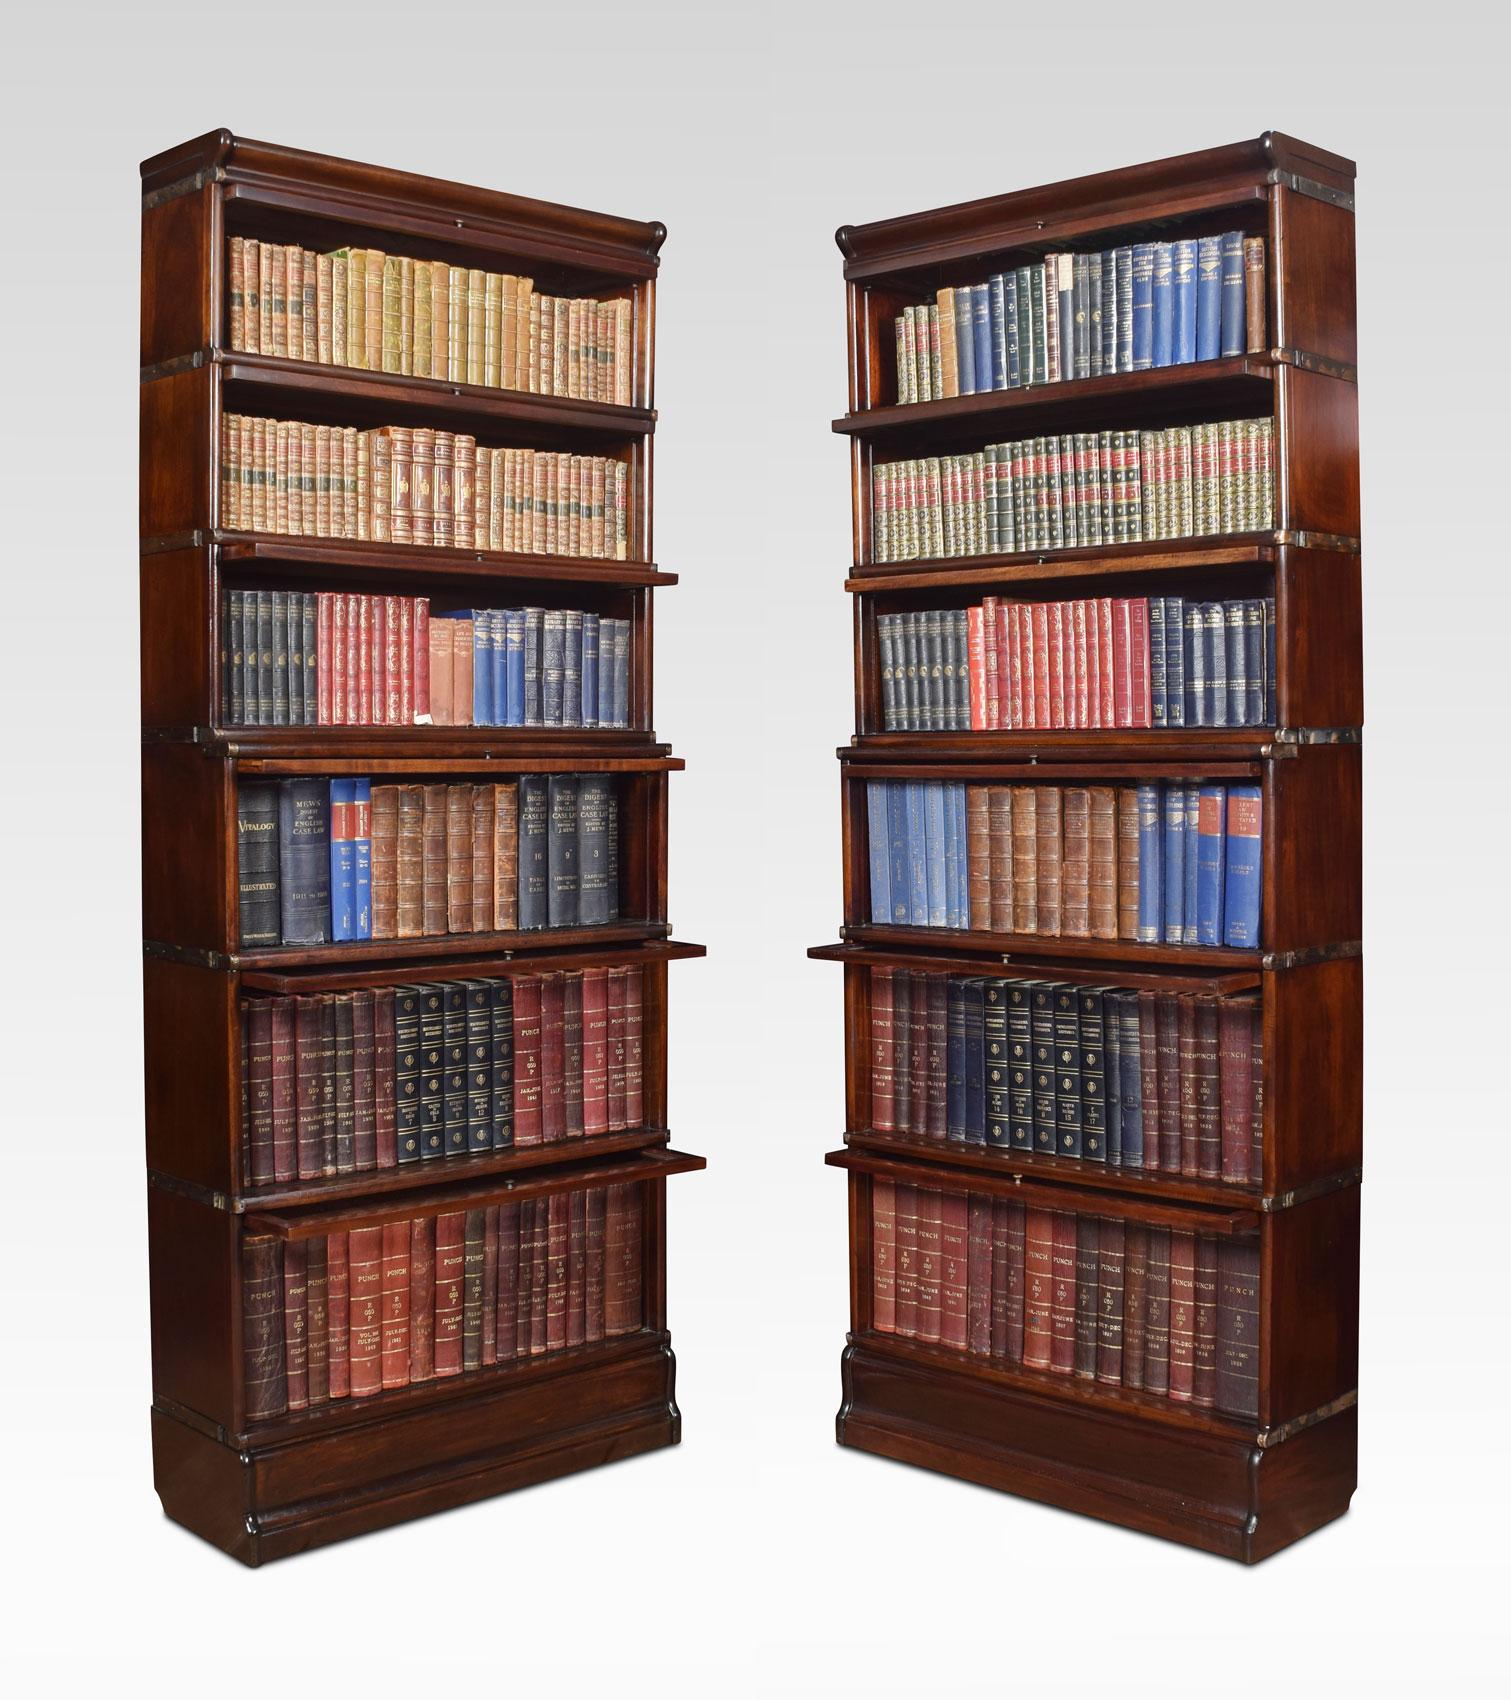 Pair of mahogany bookcases, the moulded top above six-section fitted with glazed doors. All raised up on plinth base.
Dimensions
Height 84.5 inches
Length 34 inches
width 12.5 inches.